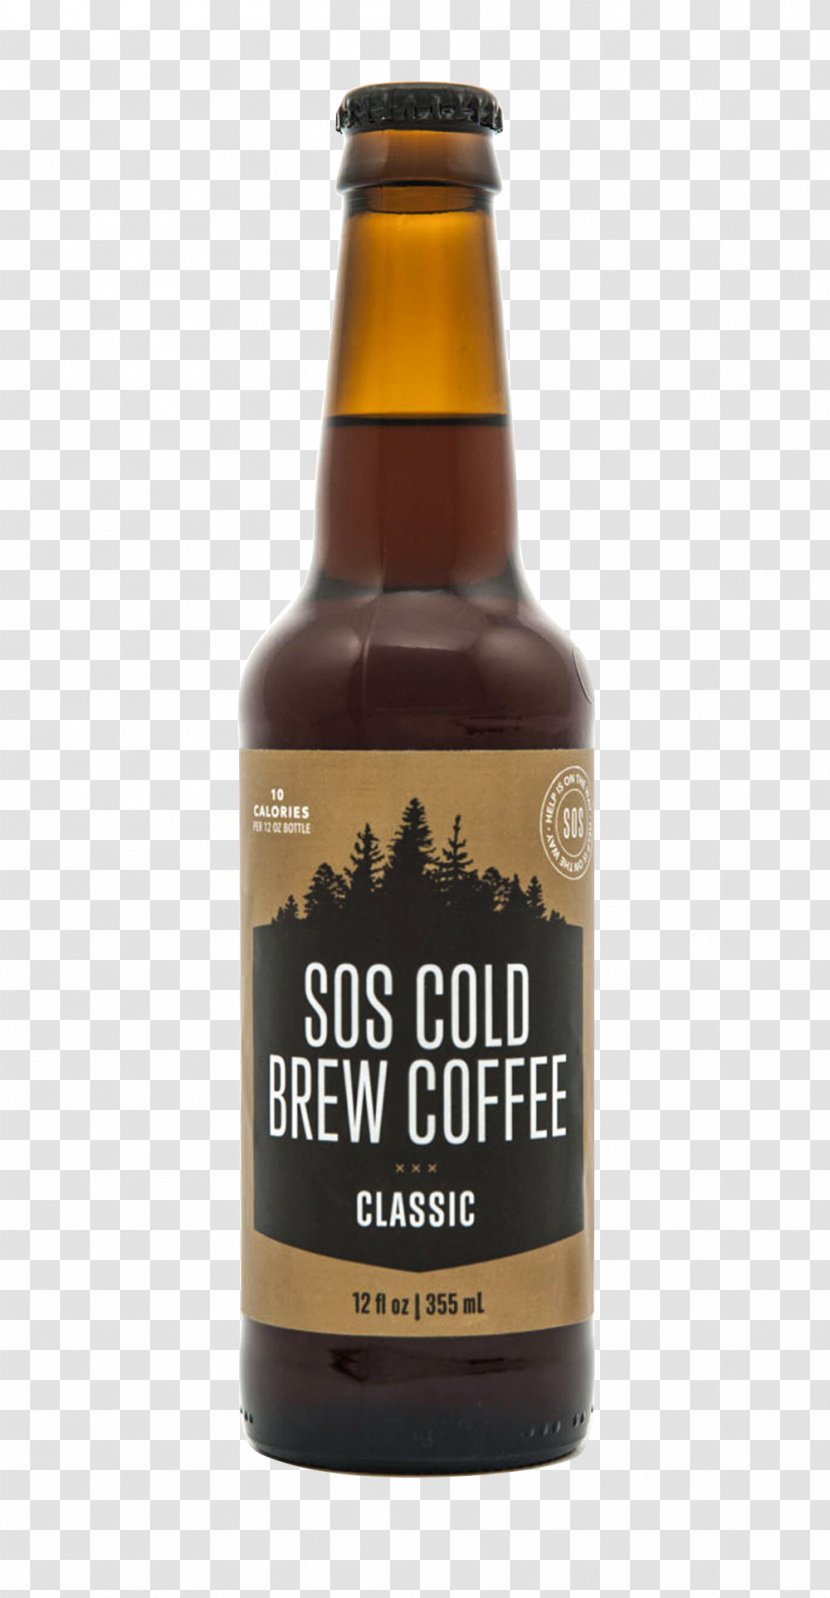 Ale Cold Brew Iced Coffee Beer - Bottle - Labels Transparent PNG